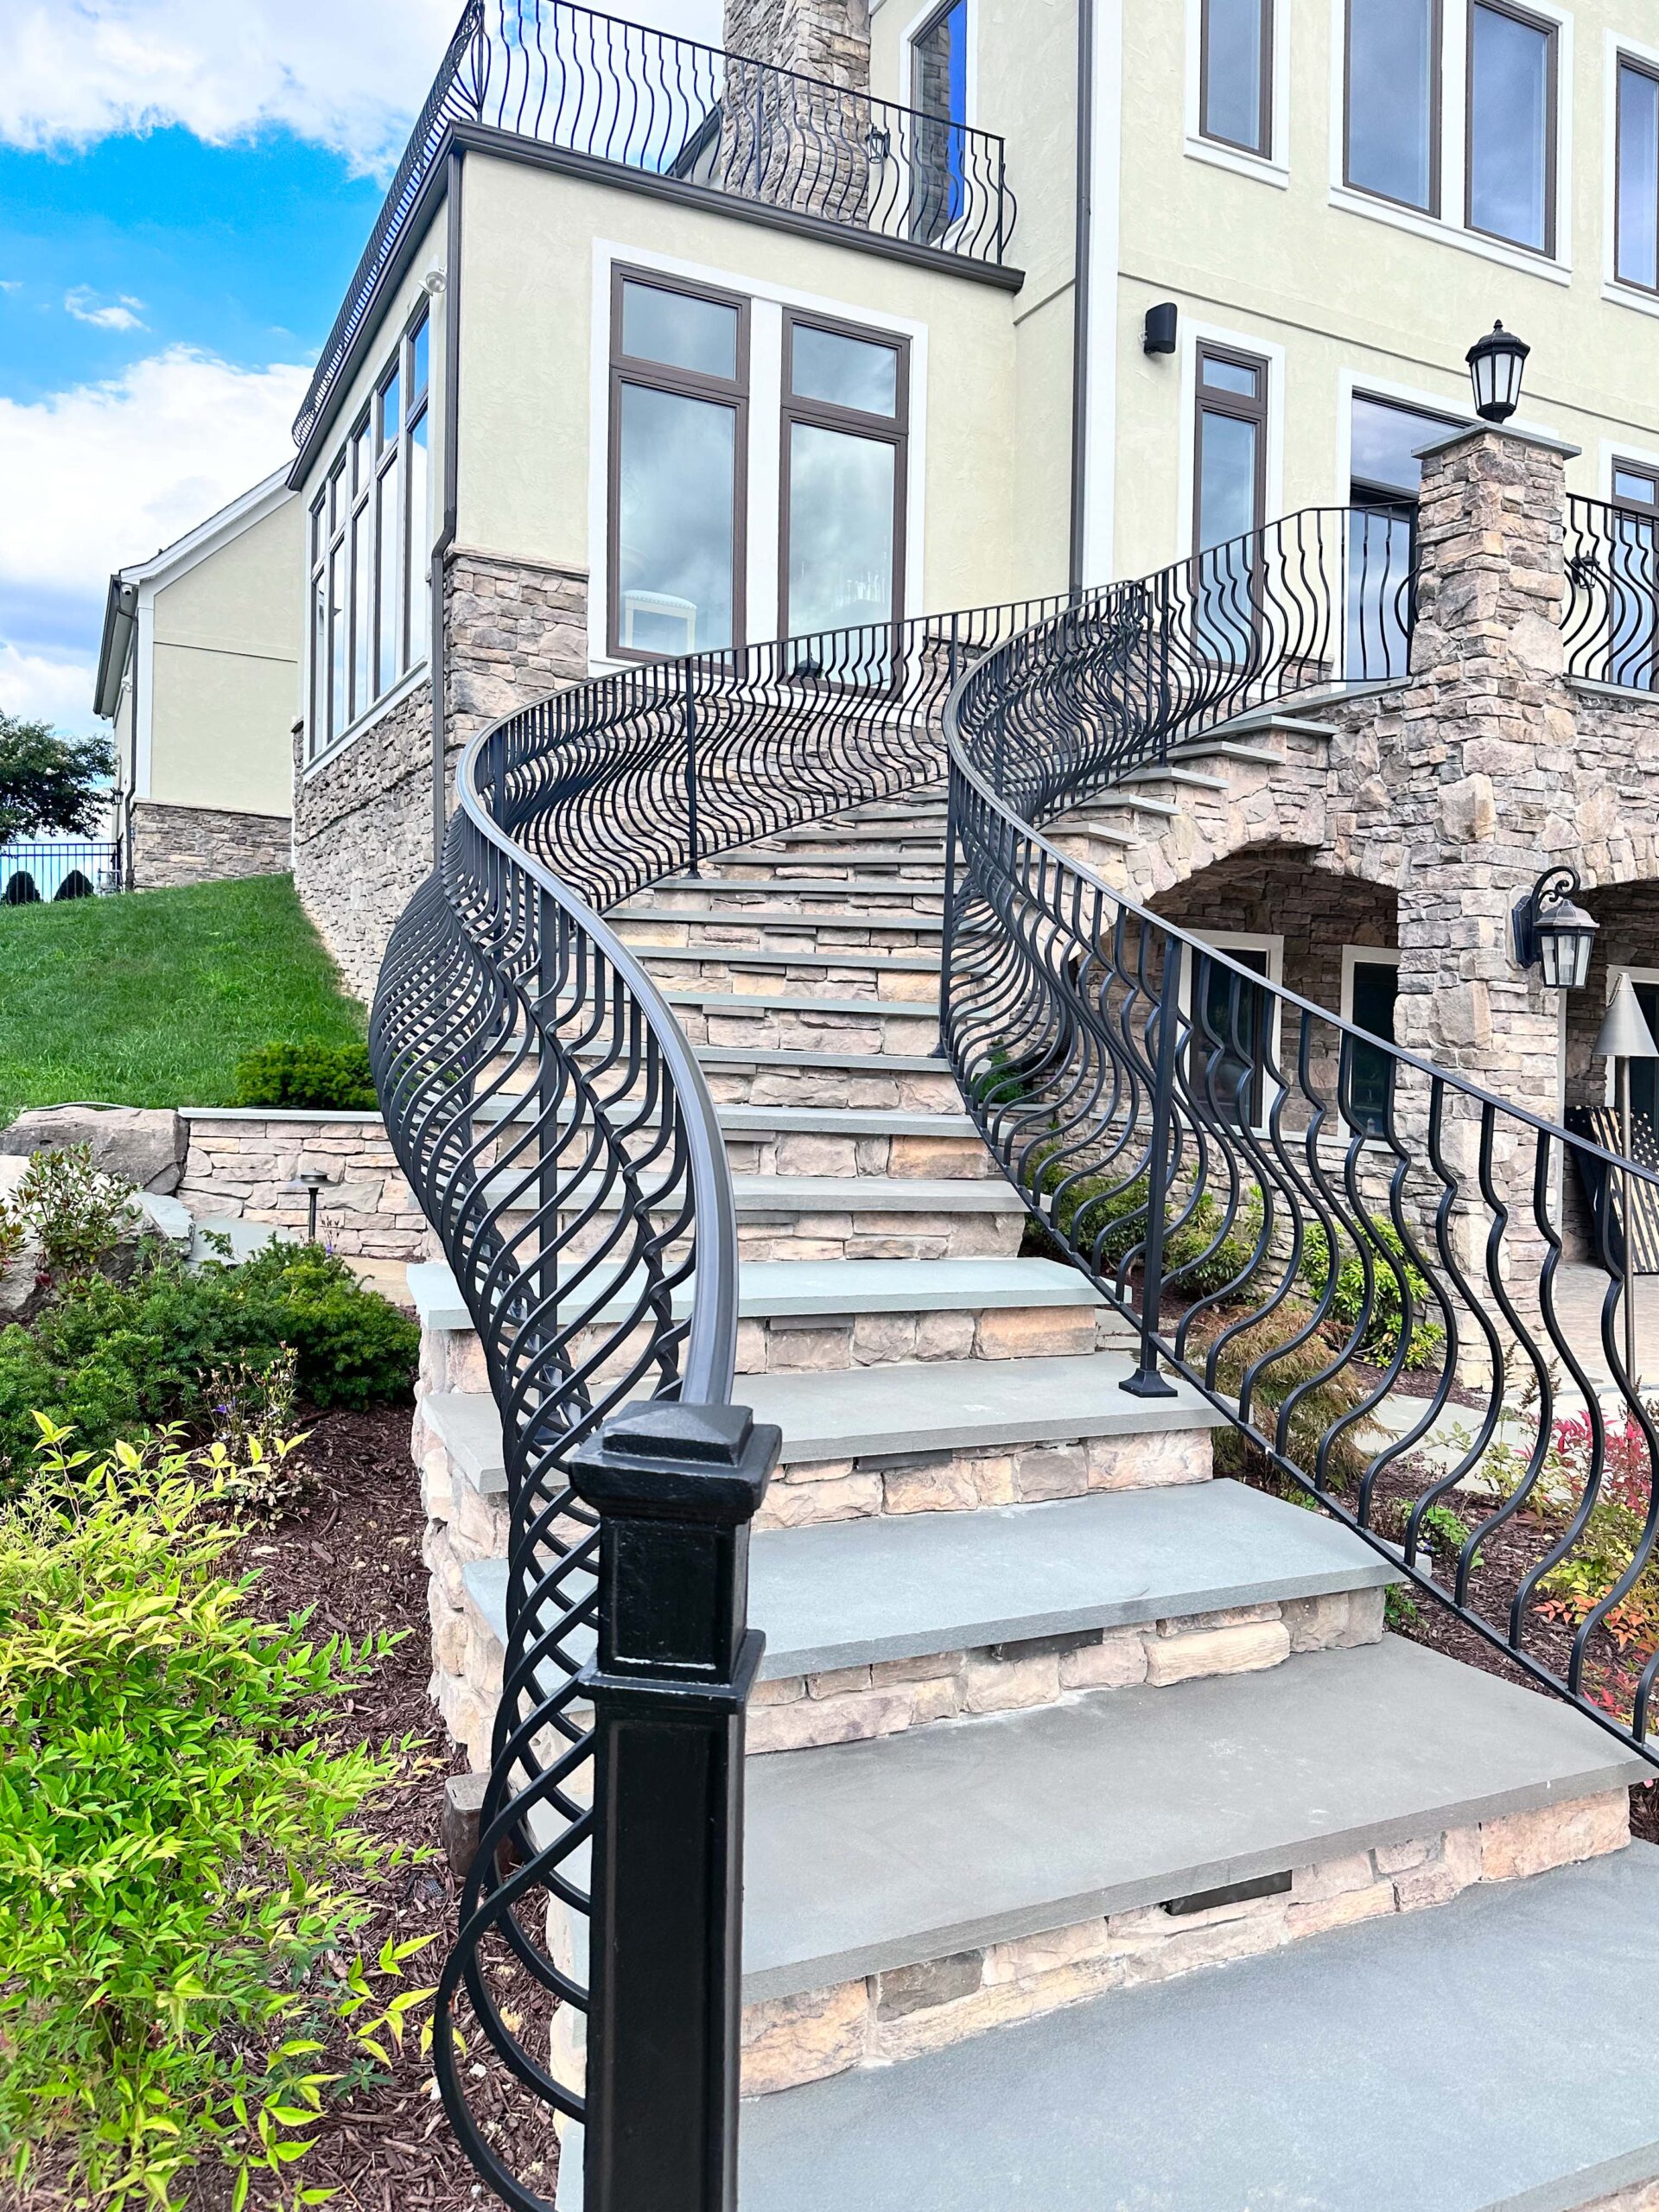 large stone staircase with iron railings leading up to a large yellow house